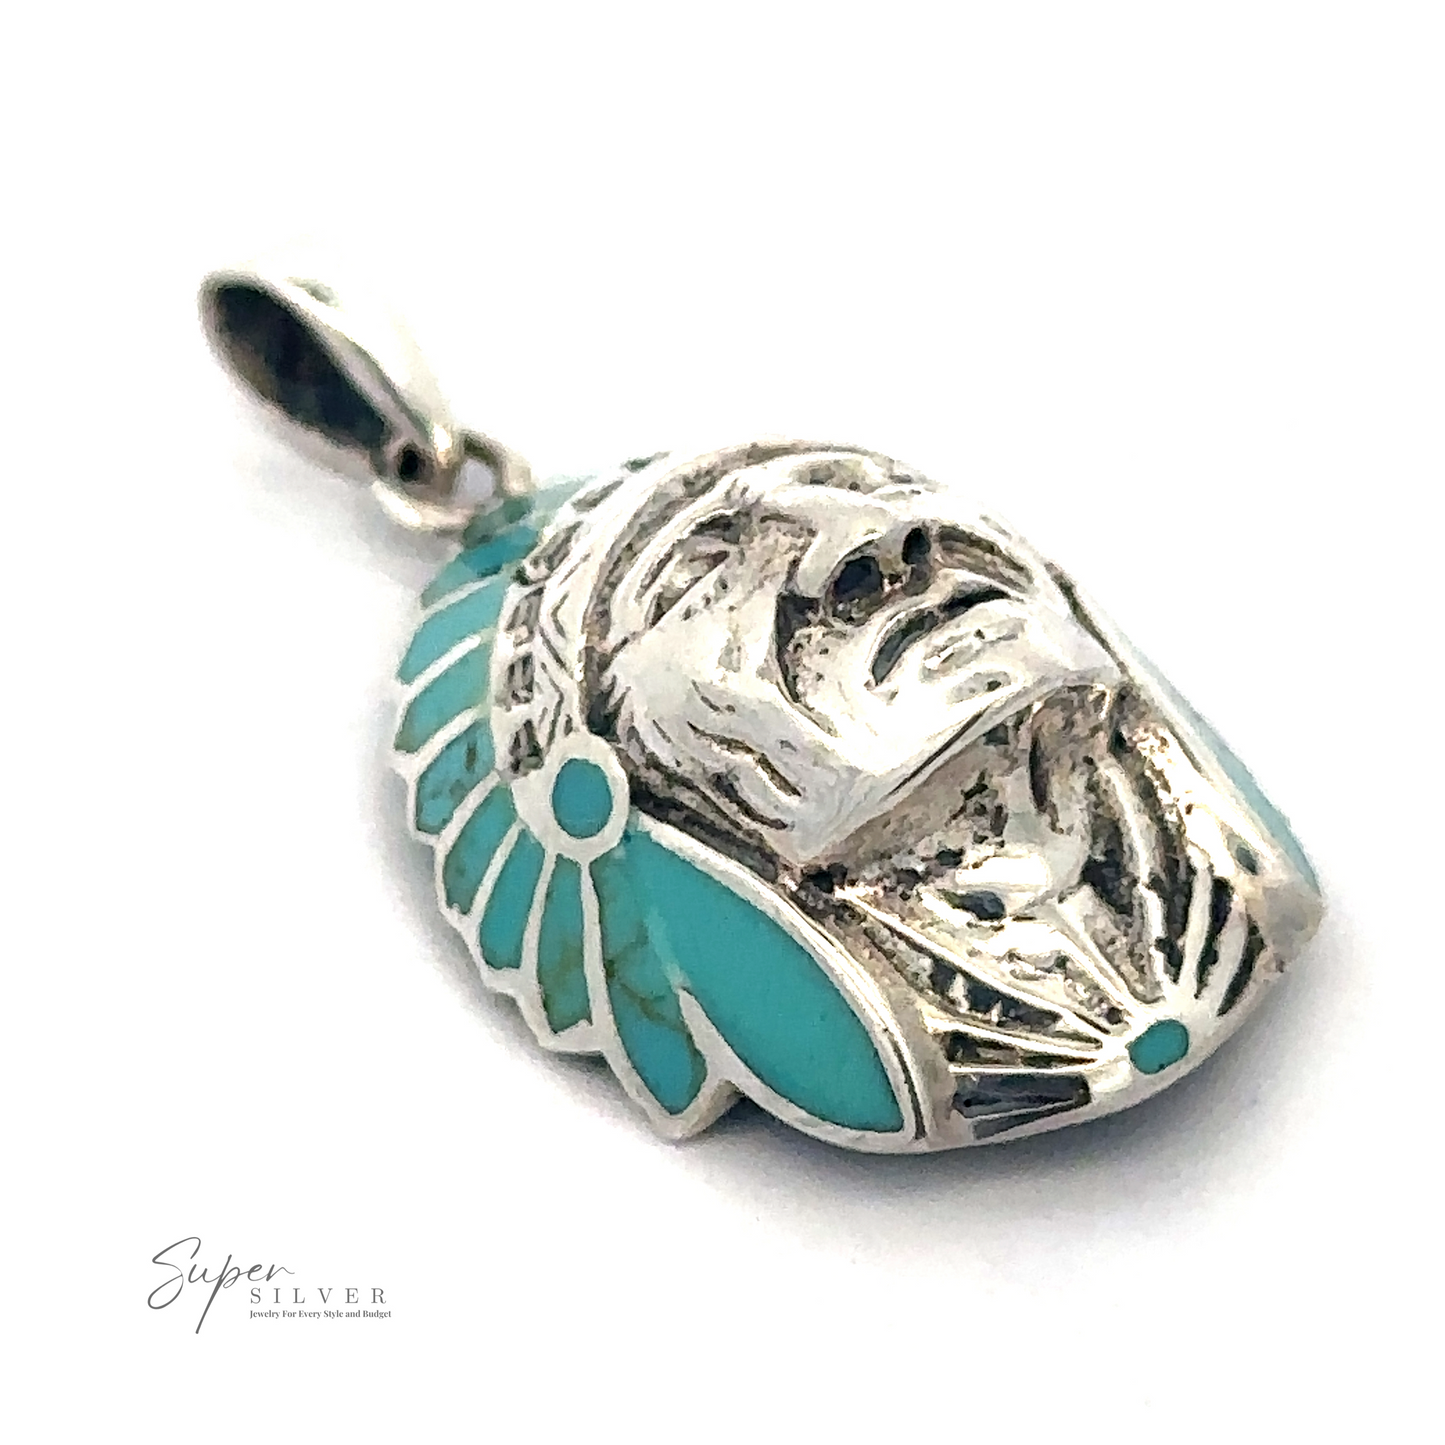 
                  
                    A sterling silver pendant featuring a turquoise-studded human face adorned with an elaborate headdress. The "Super Silver" logo is visible in the bottom left corner, making this Turquoise Chief Head Pendant a standout piece.
                  
                